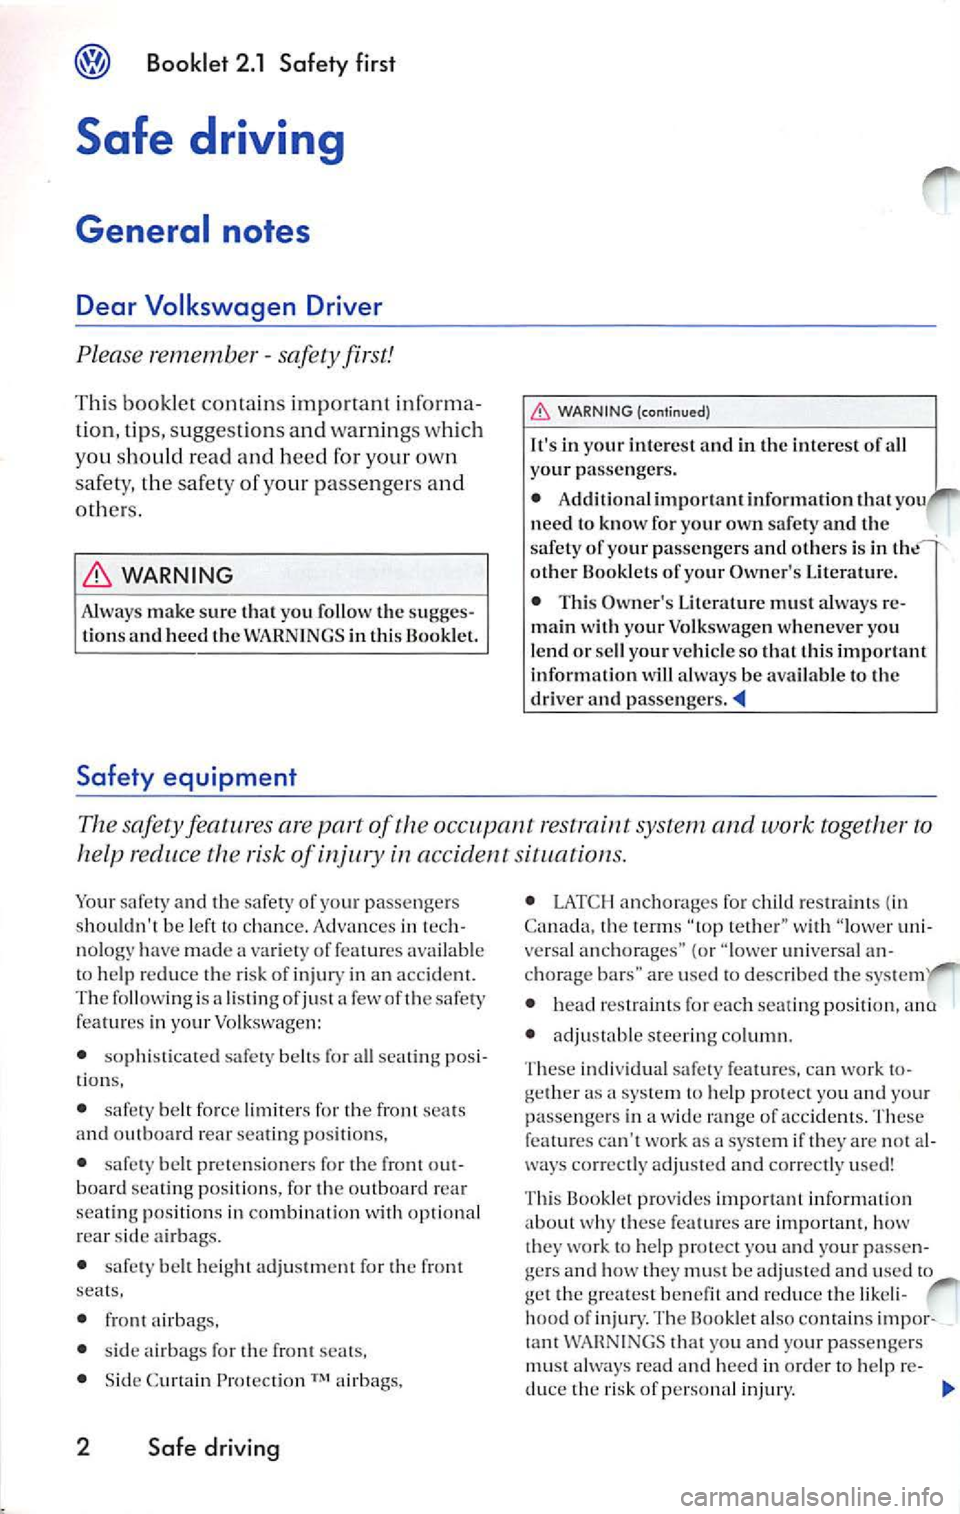 VOLKSWAGEN JETTA 2010  Owners Manual Booklet  2.1  Safety  first 
Safe  driving 
Gene ral  notes 
Dear  Vo lkswagen  Driver 
Plea se remembe r -safety  first! 
This  booklet  conta in s impo rtan t informa­
tio n, tip s, suggest ions  a